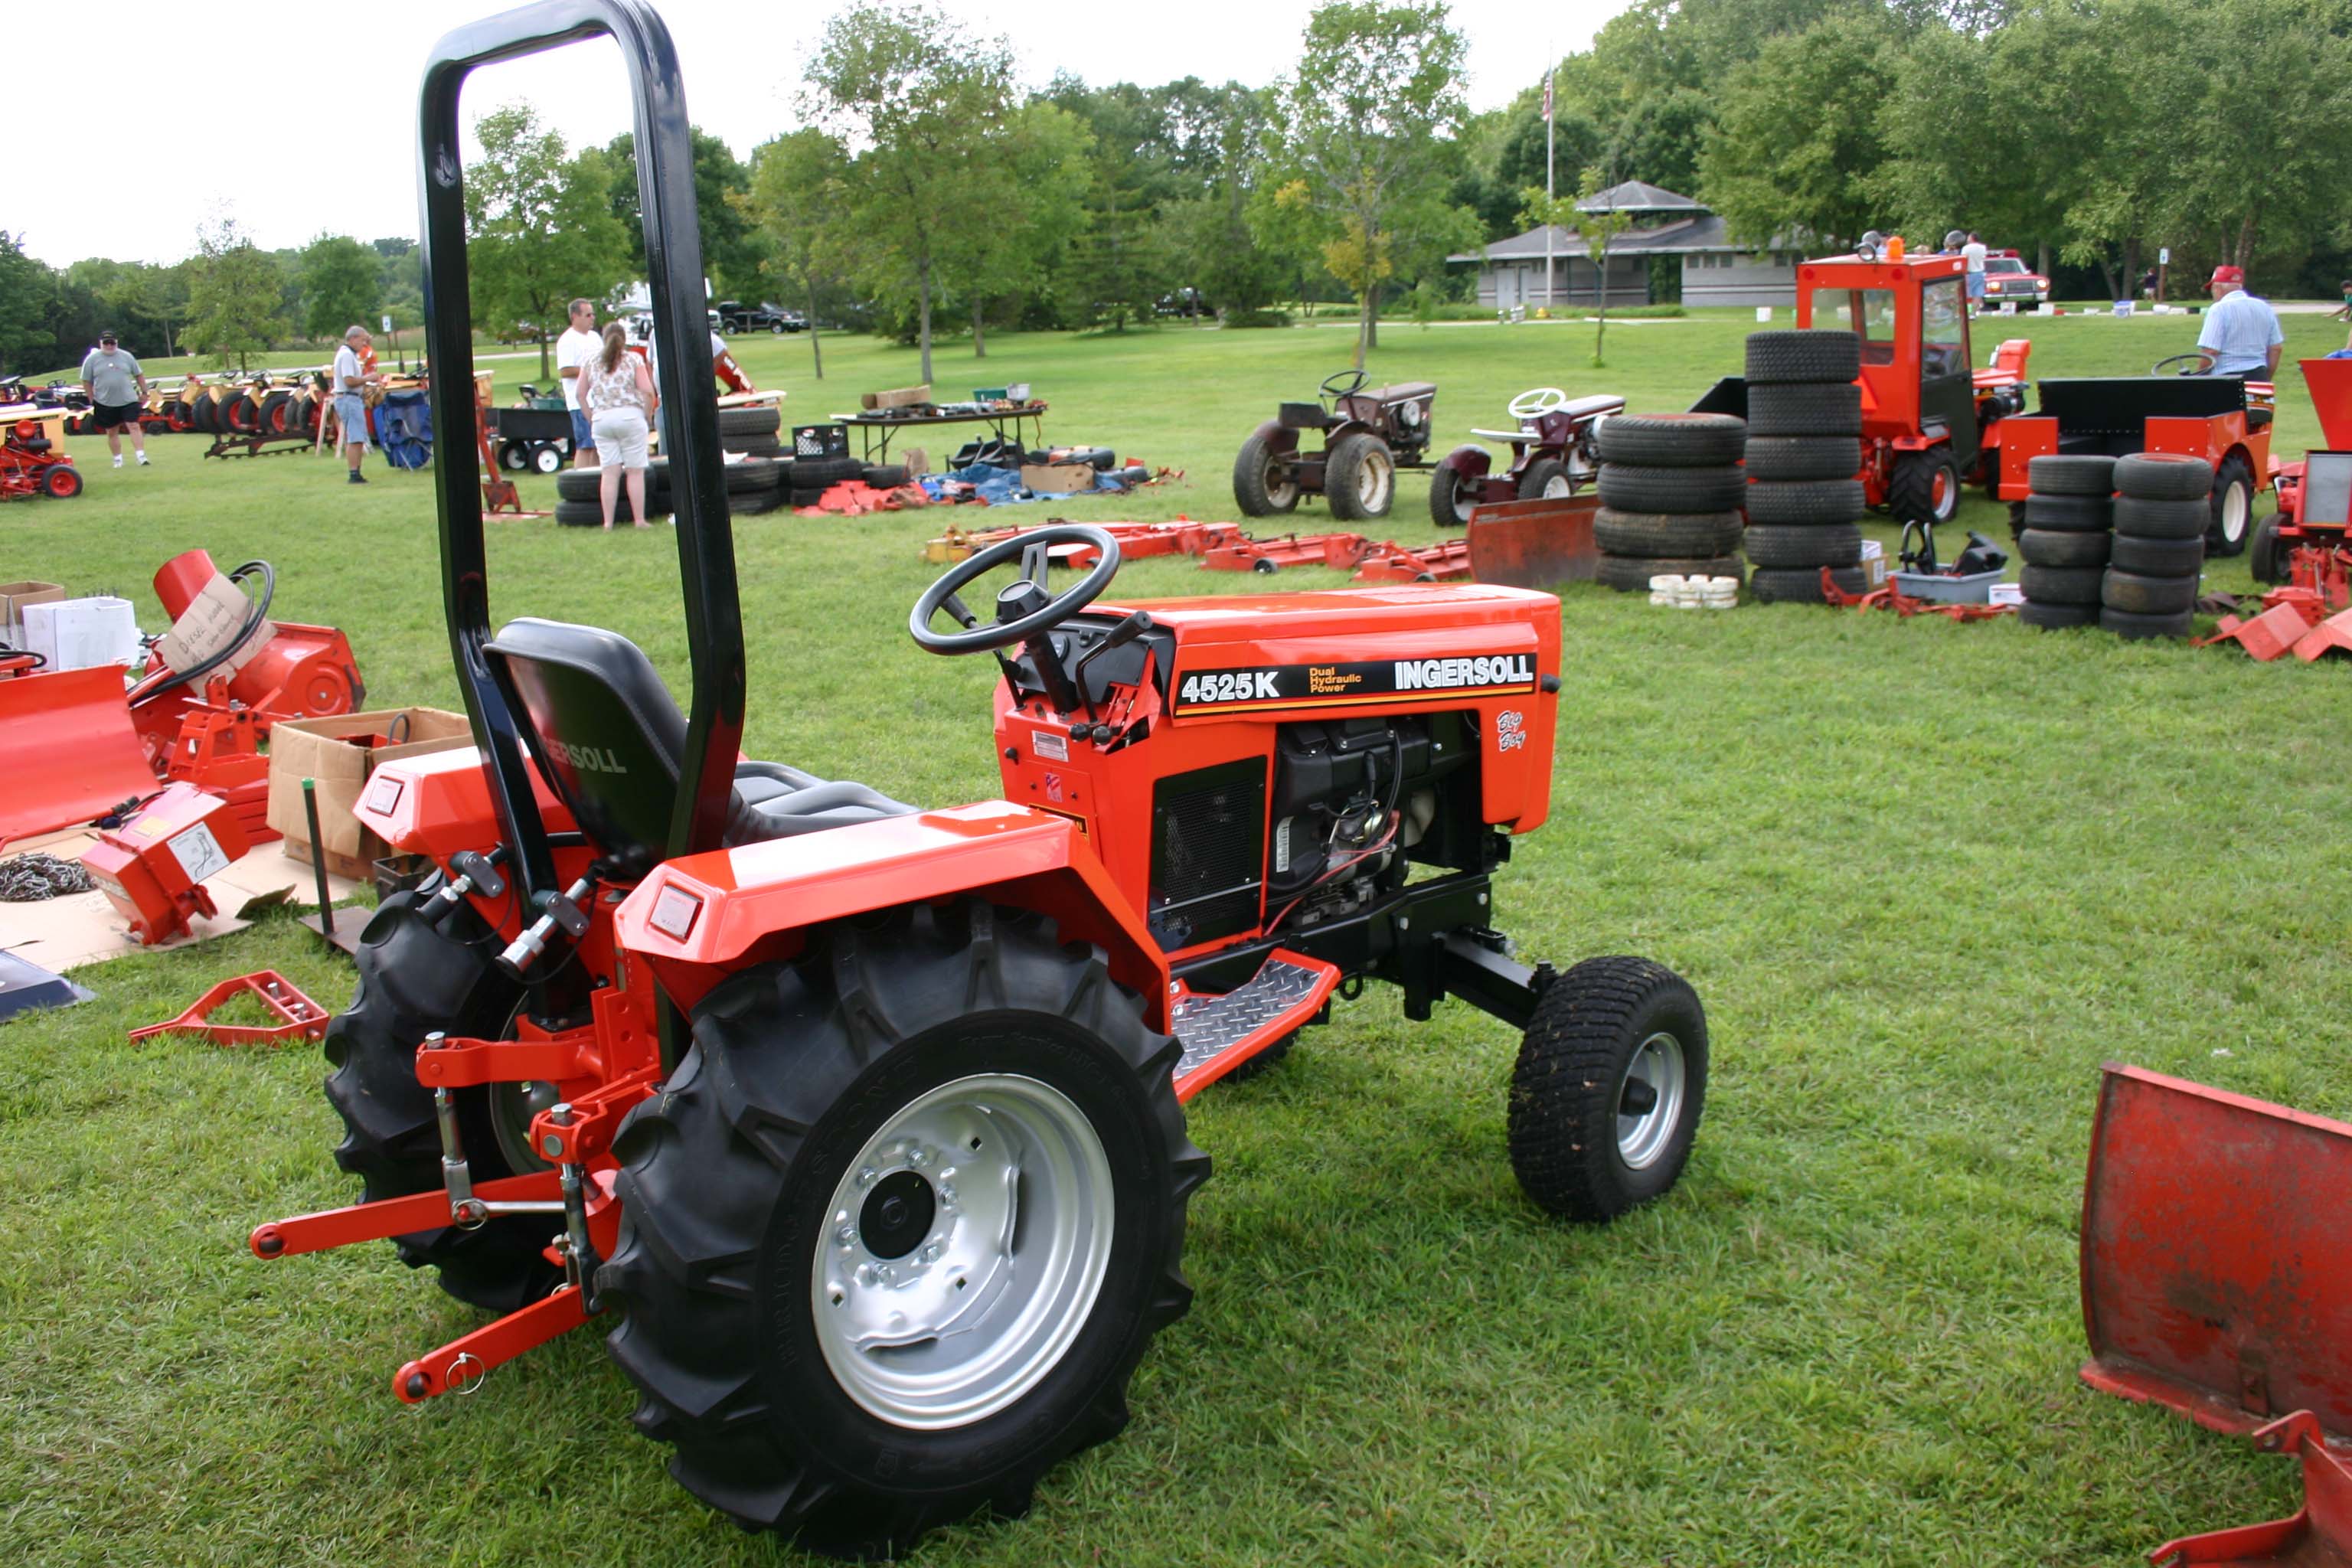 Gallery images and information: Ingersoll Garden Tractor